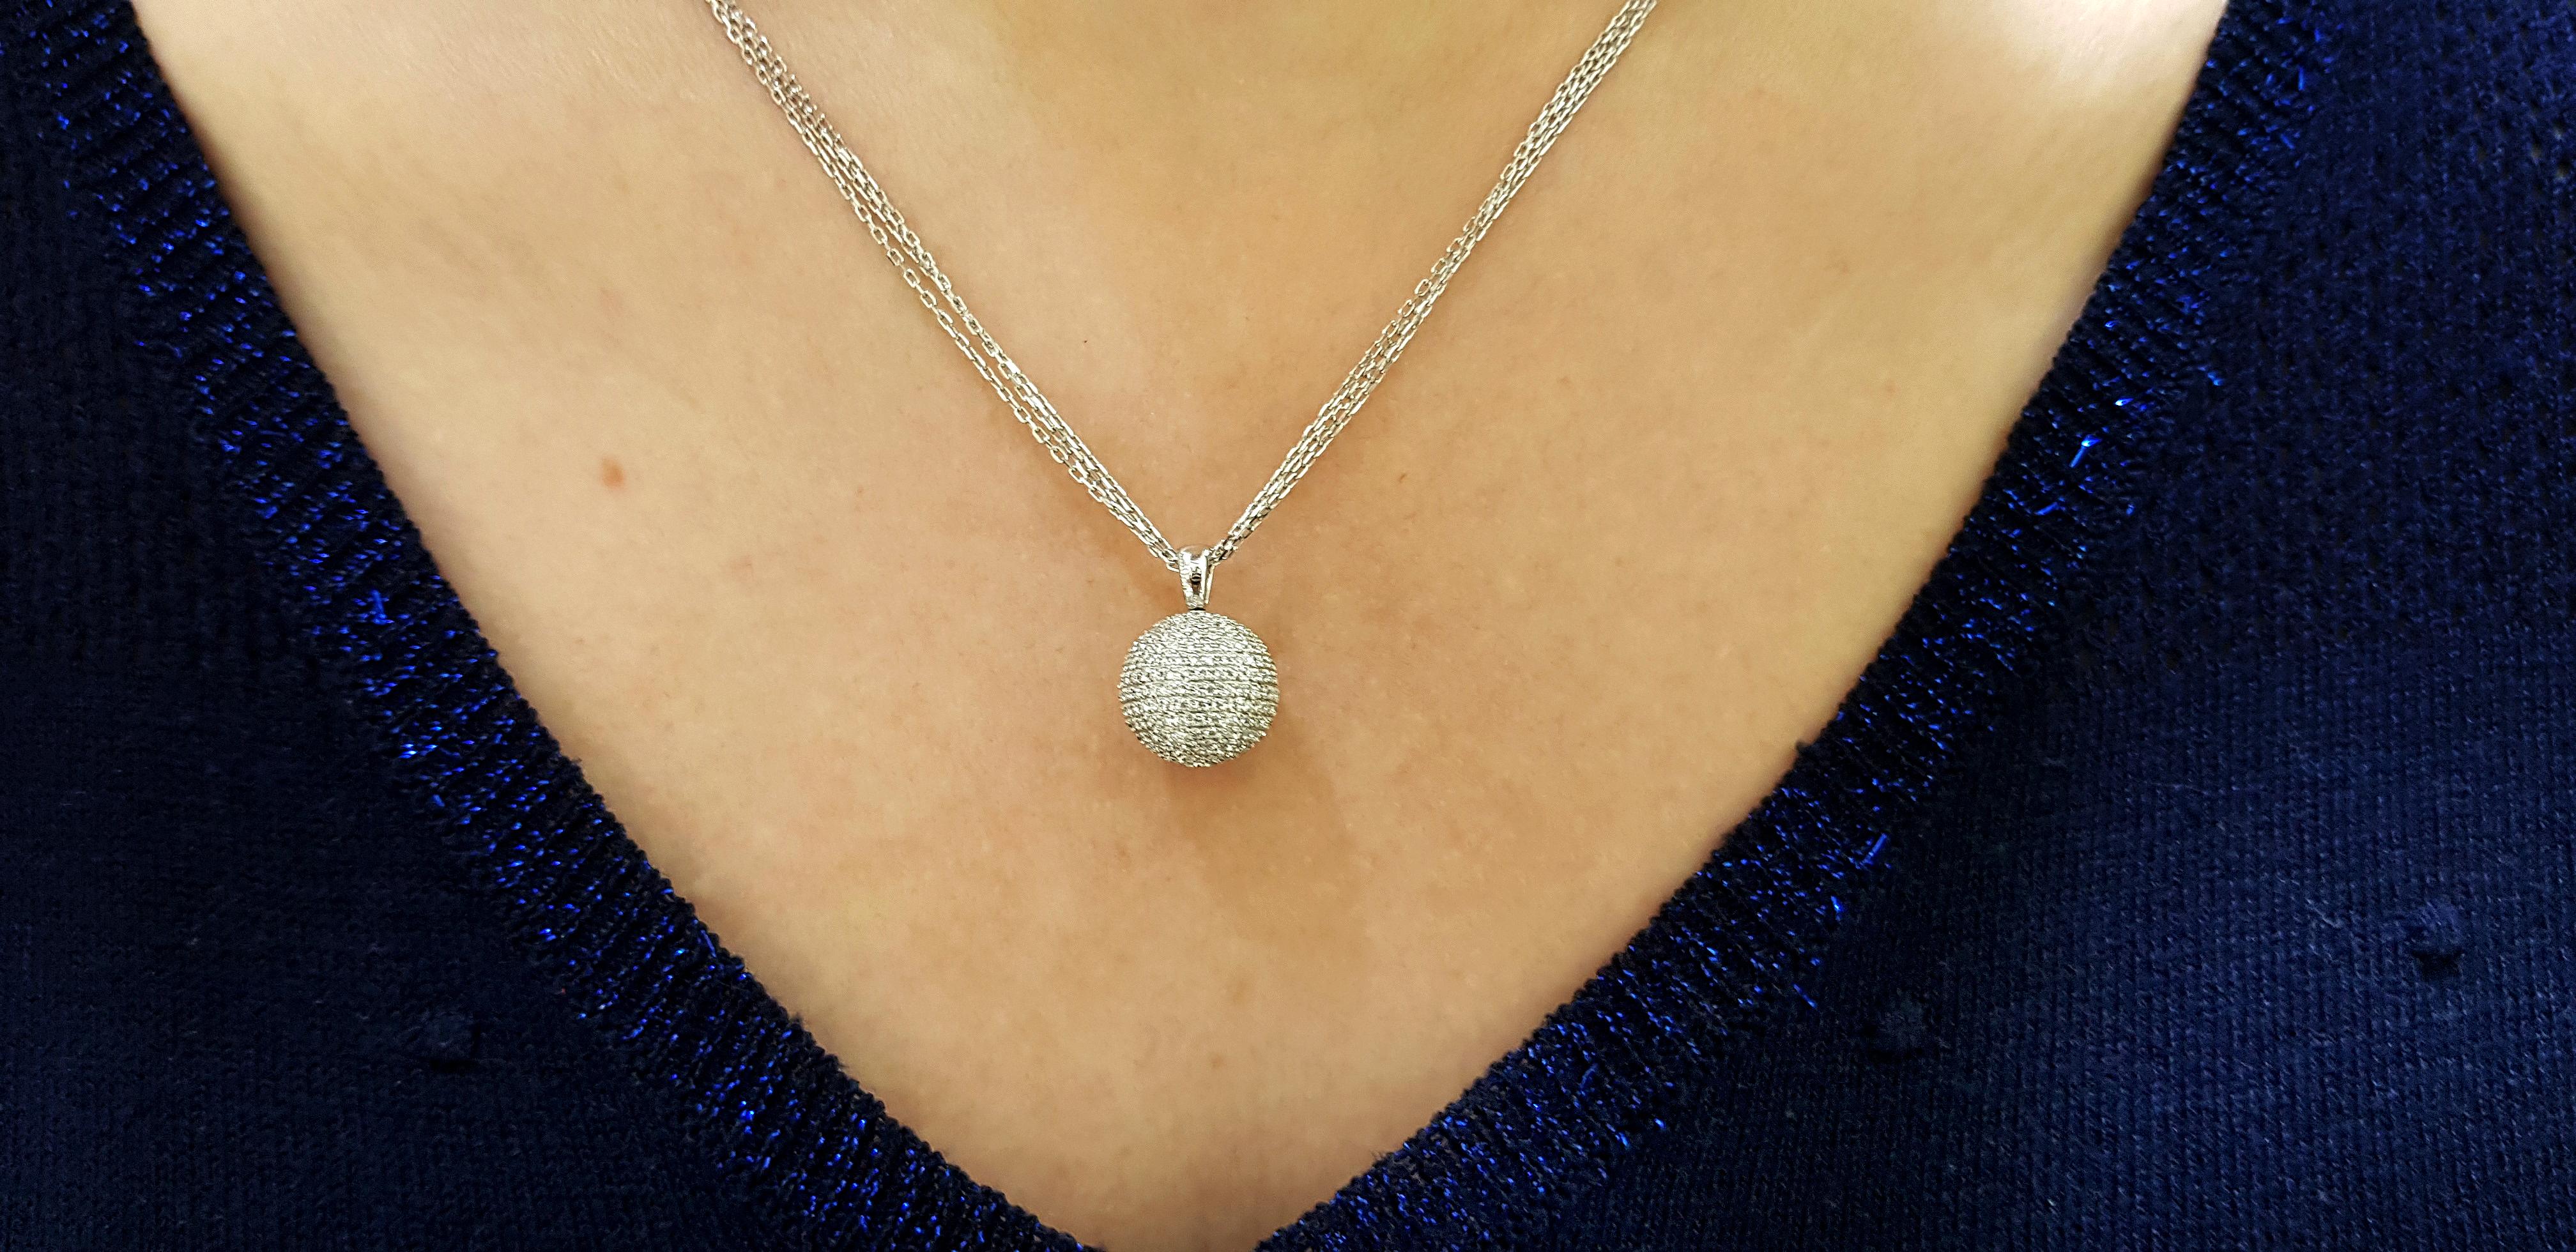 Illuminating and Luxurious, this outstanding quality 1.30 Carat Diamond and triple chain, 18 Karat White Gold Pendant with Beautiful classic Round Brilliant Cut white Diamonds, color G/H, clarity SI1. Sphere diameter is 0.50 inches (13 mm). Bespoke,